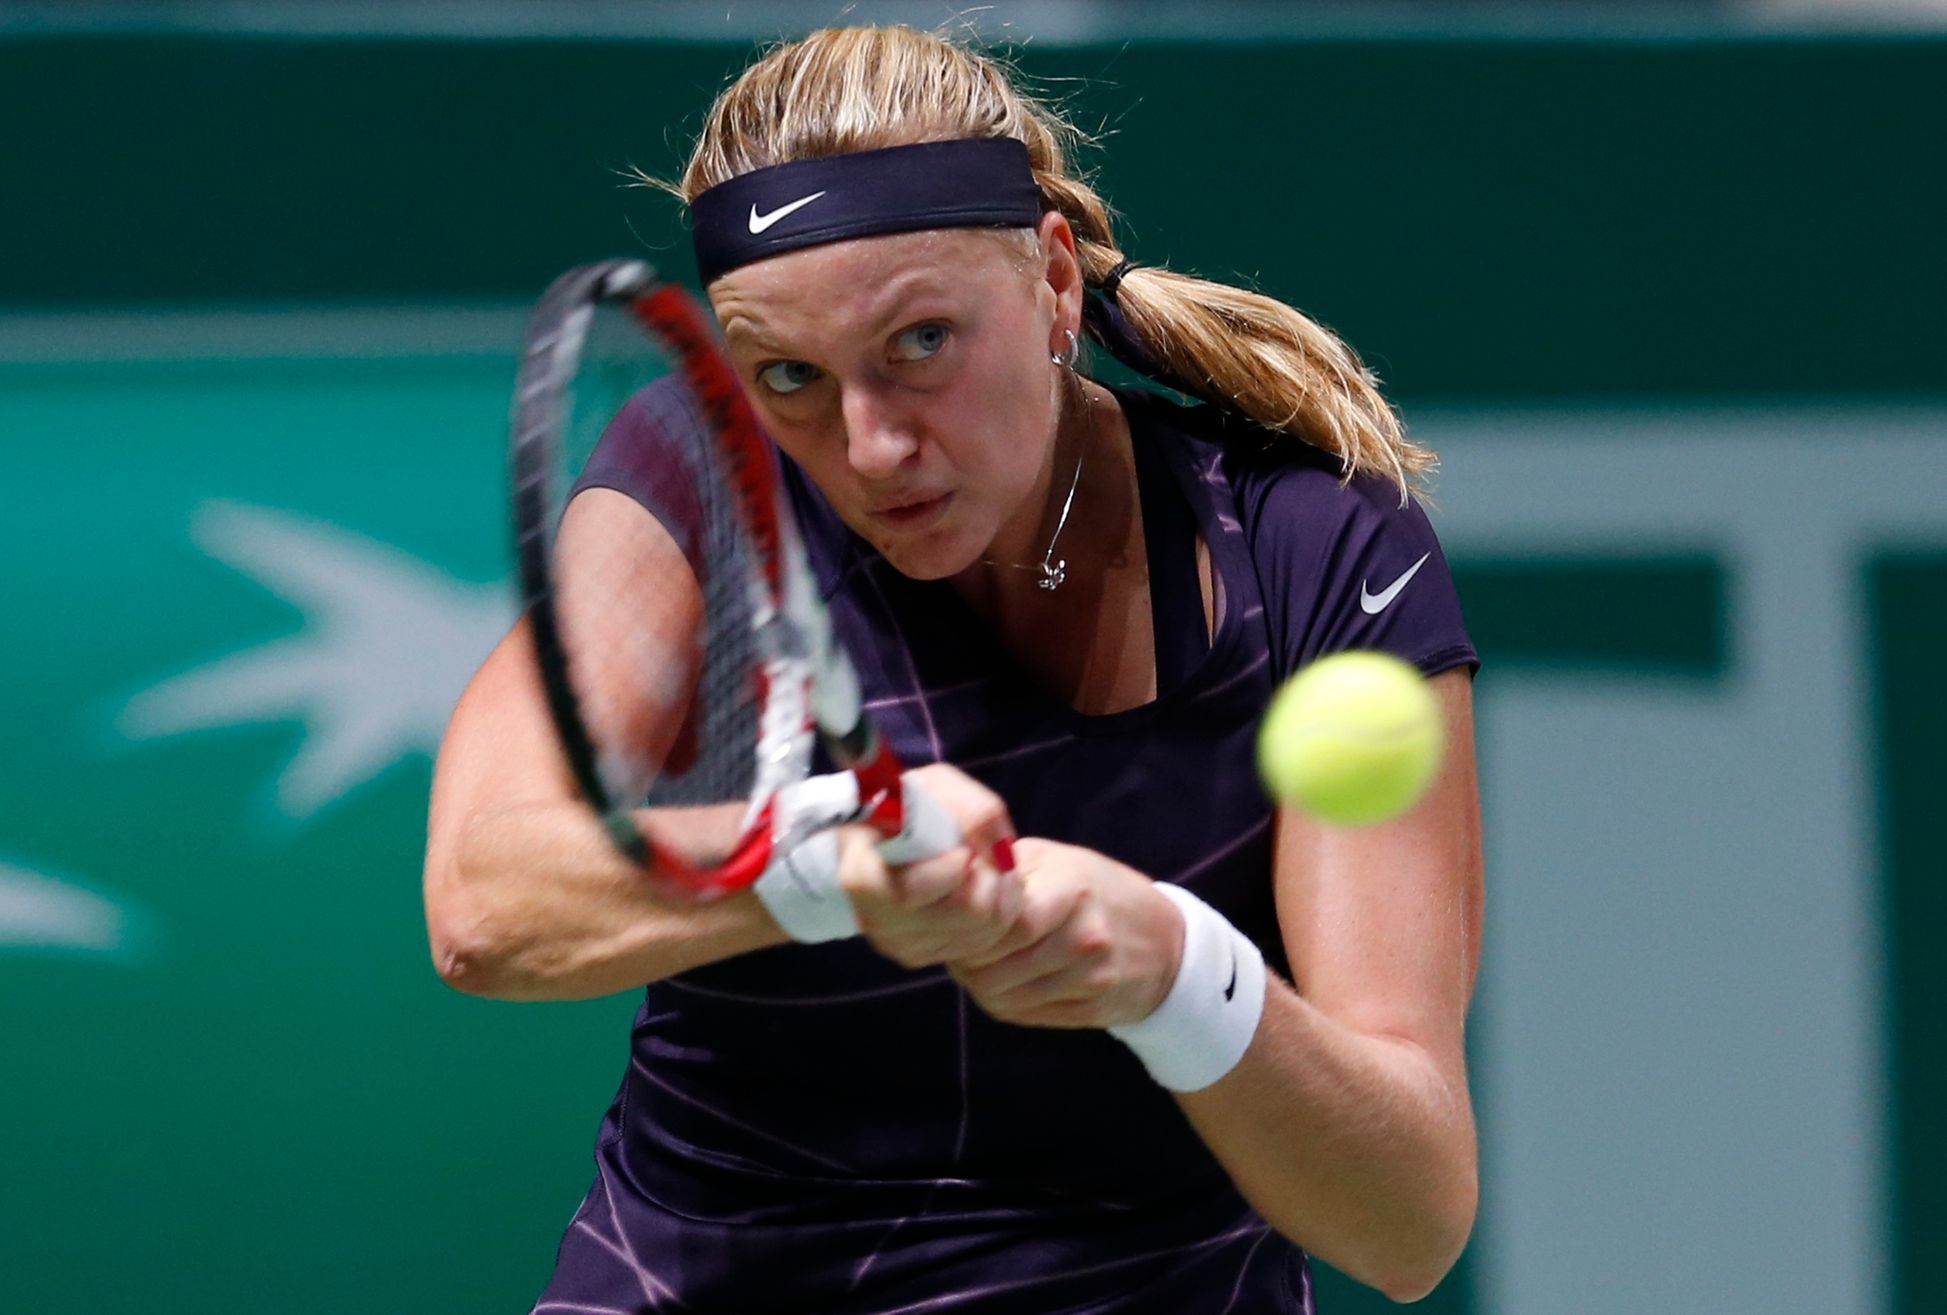 Kvitova of Czech Republic hits a return to Williams of the U.S. during their WTA tennis championships match at Sinan Erdem Dome in Istanbul